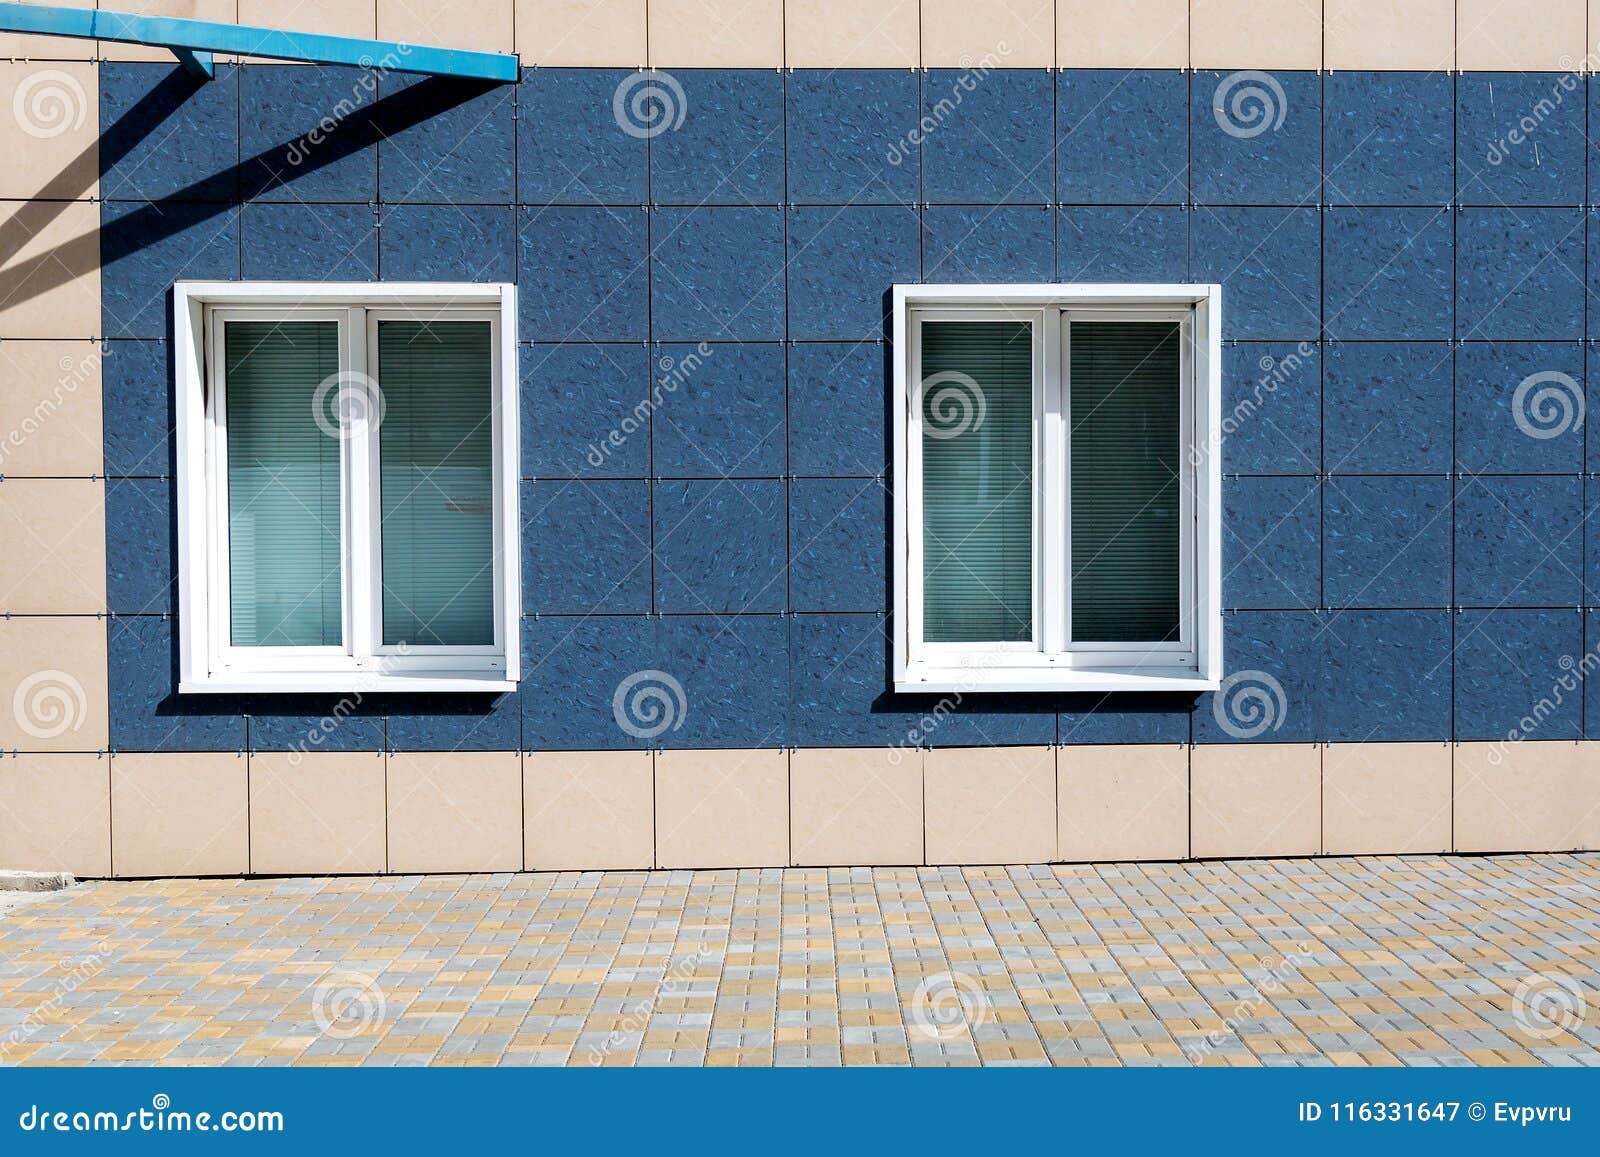 Windows on the outside wall of the building